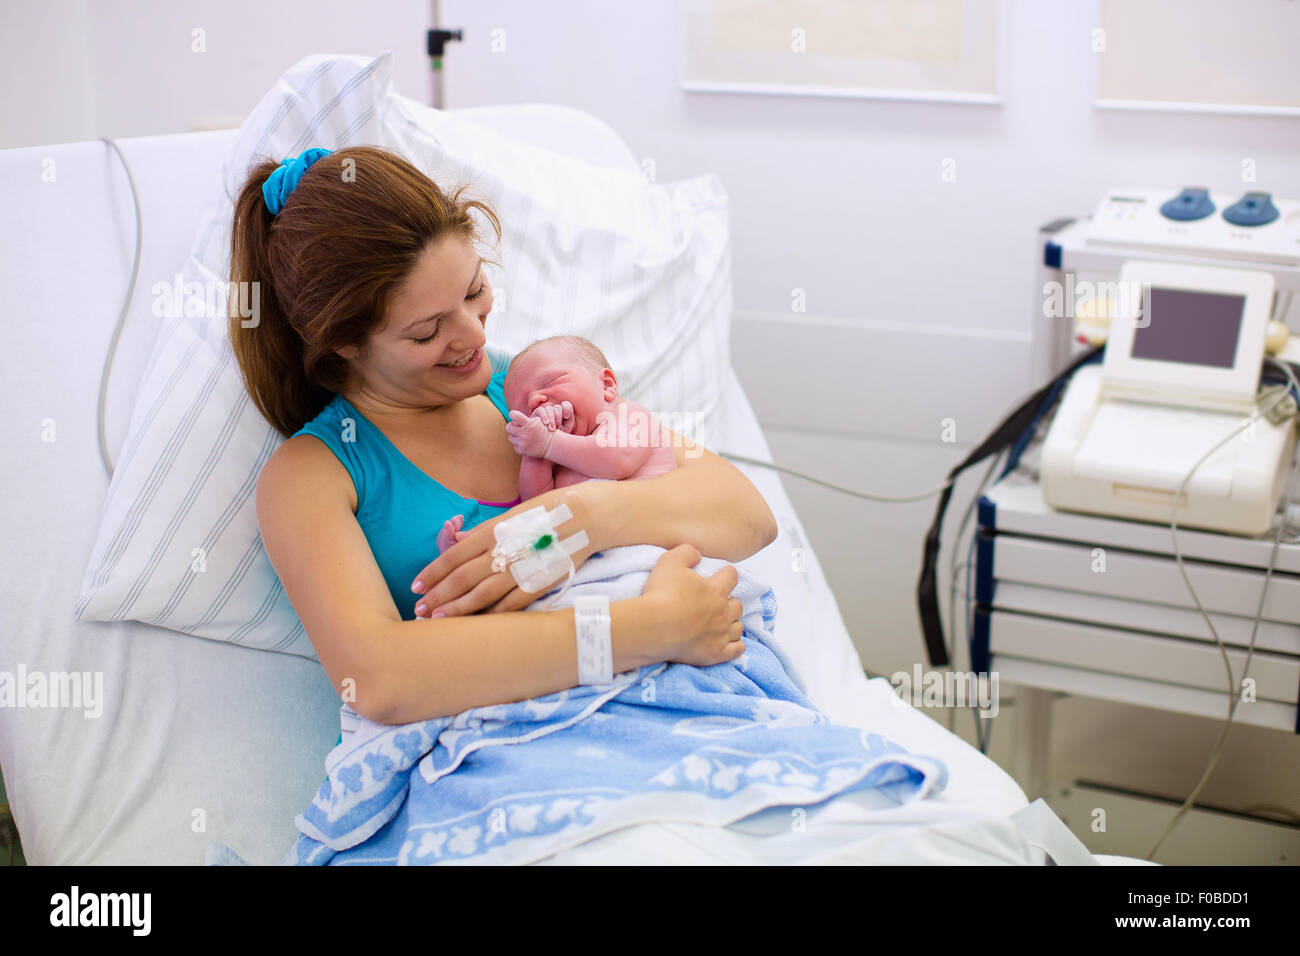 Mother giving birth to a baby. Newborn baby in delivery room. Mom holding her new born child after labor. Stock Photo